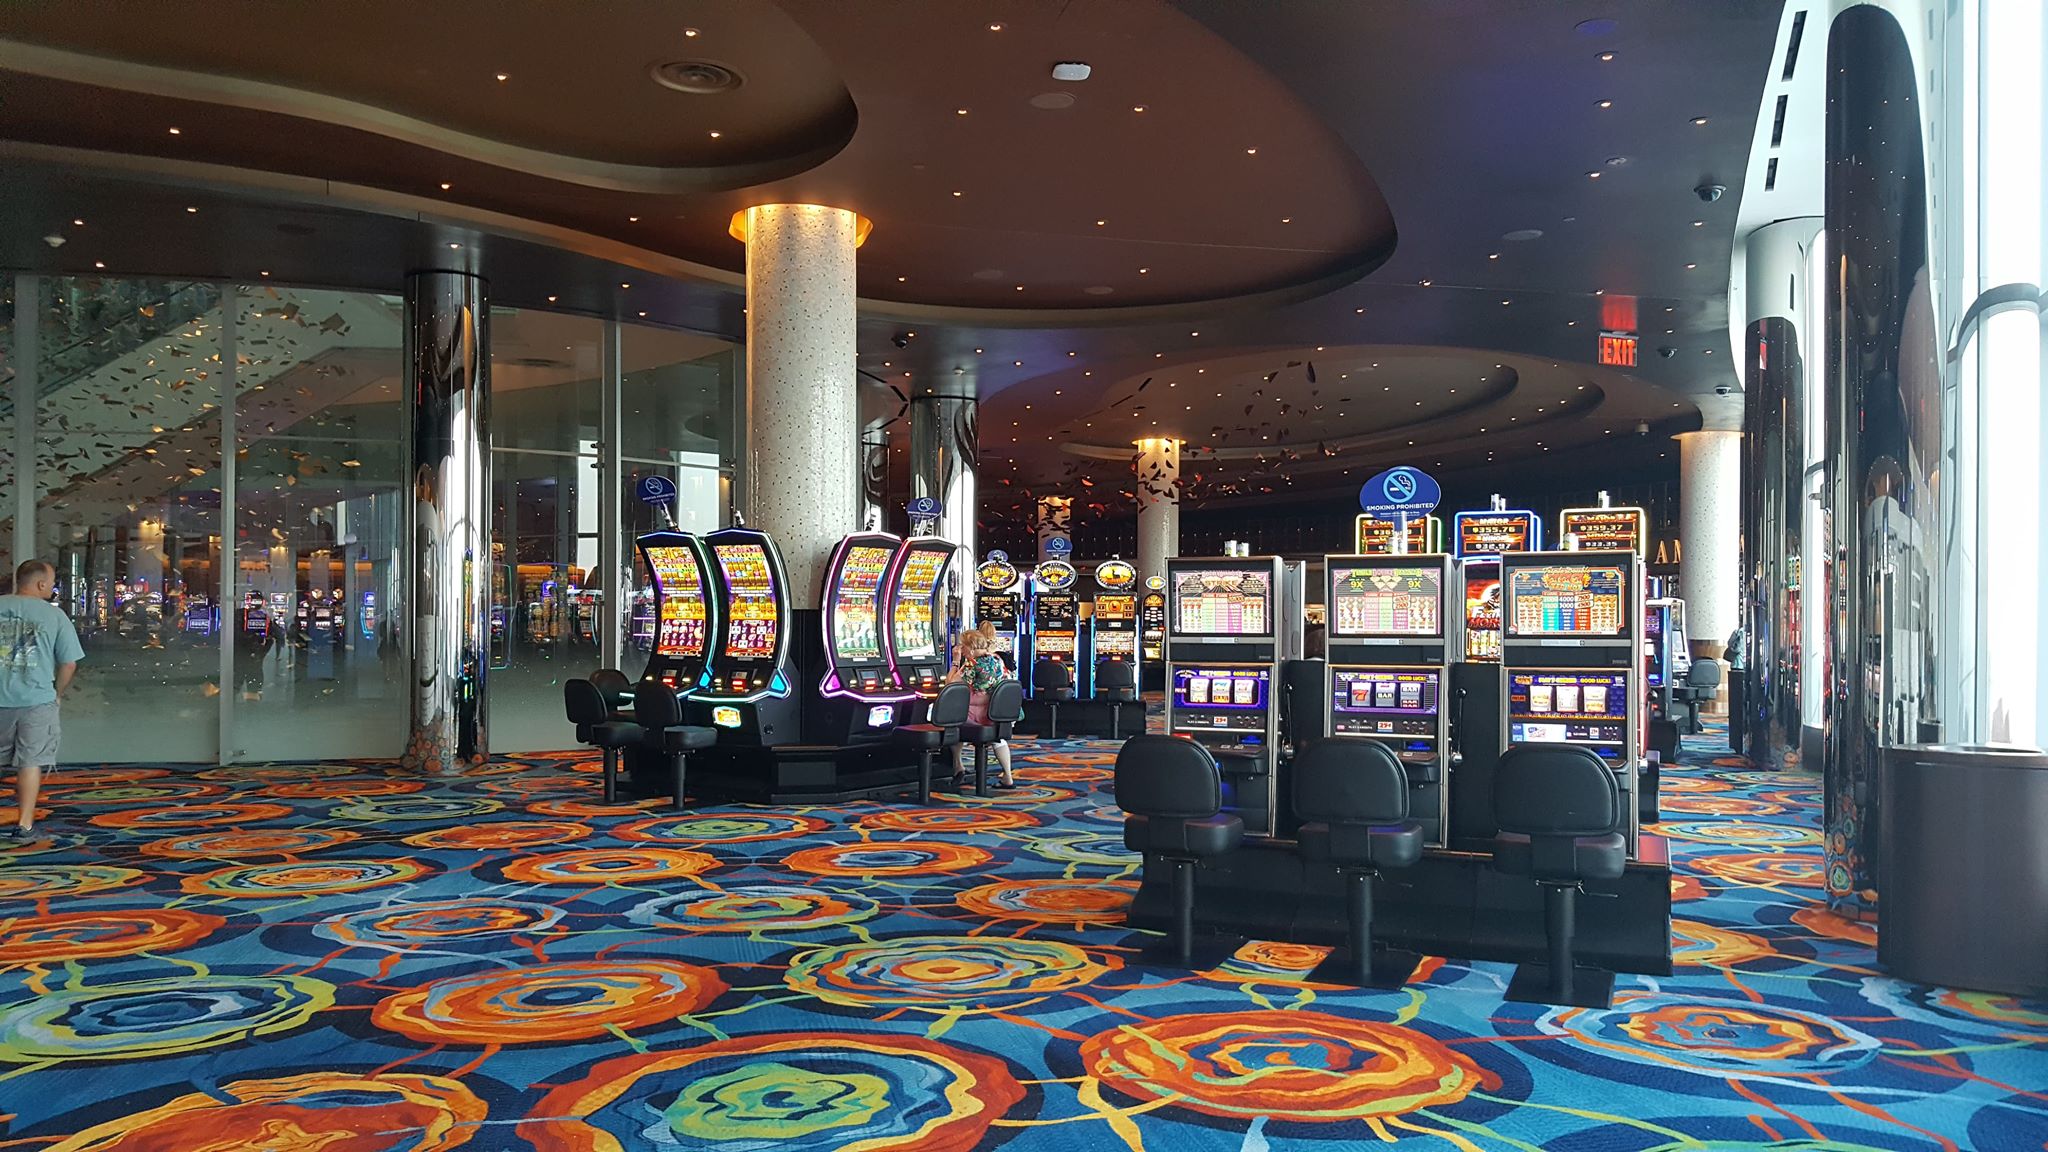 Ocean Resort Casino Atlantic City NJ- A Great Place for Friends and